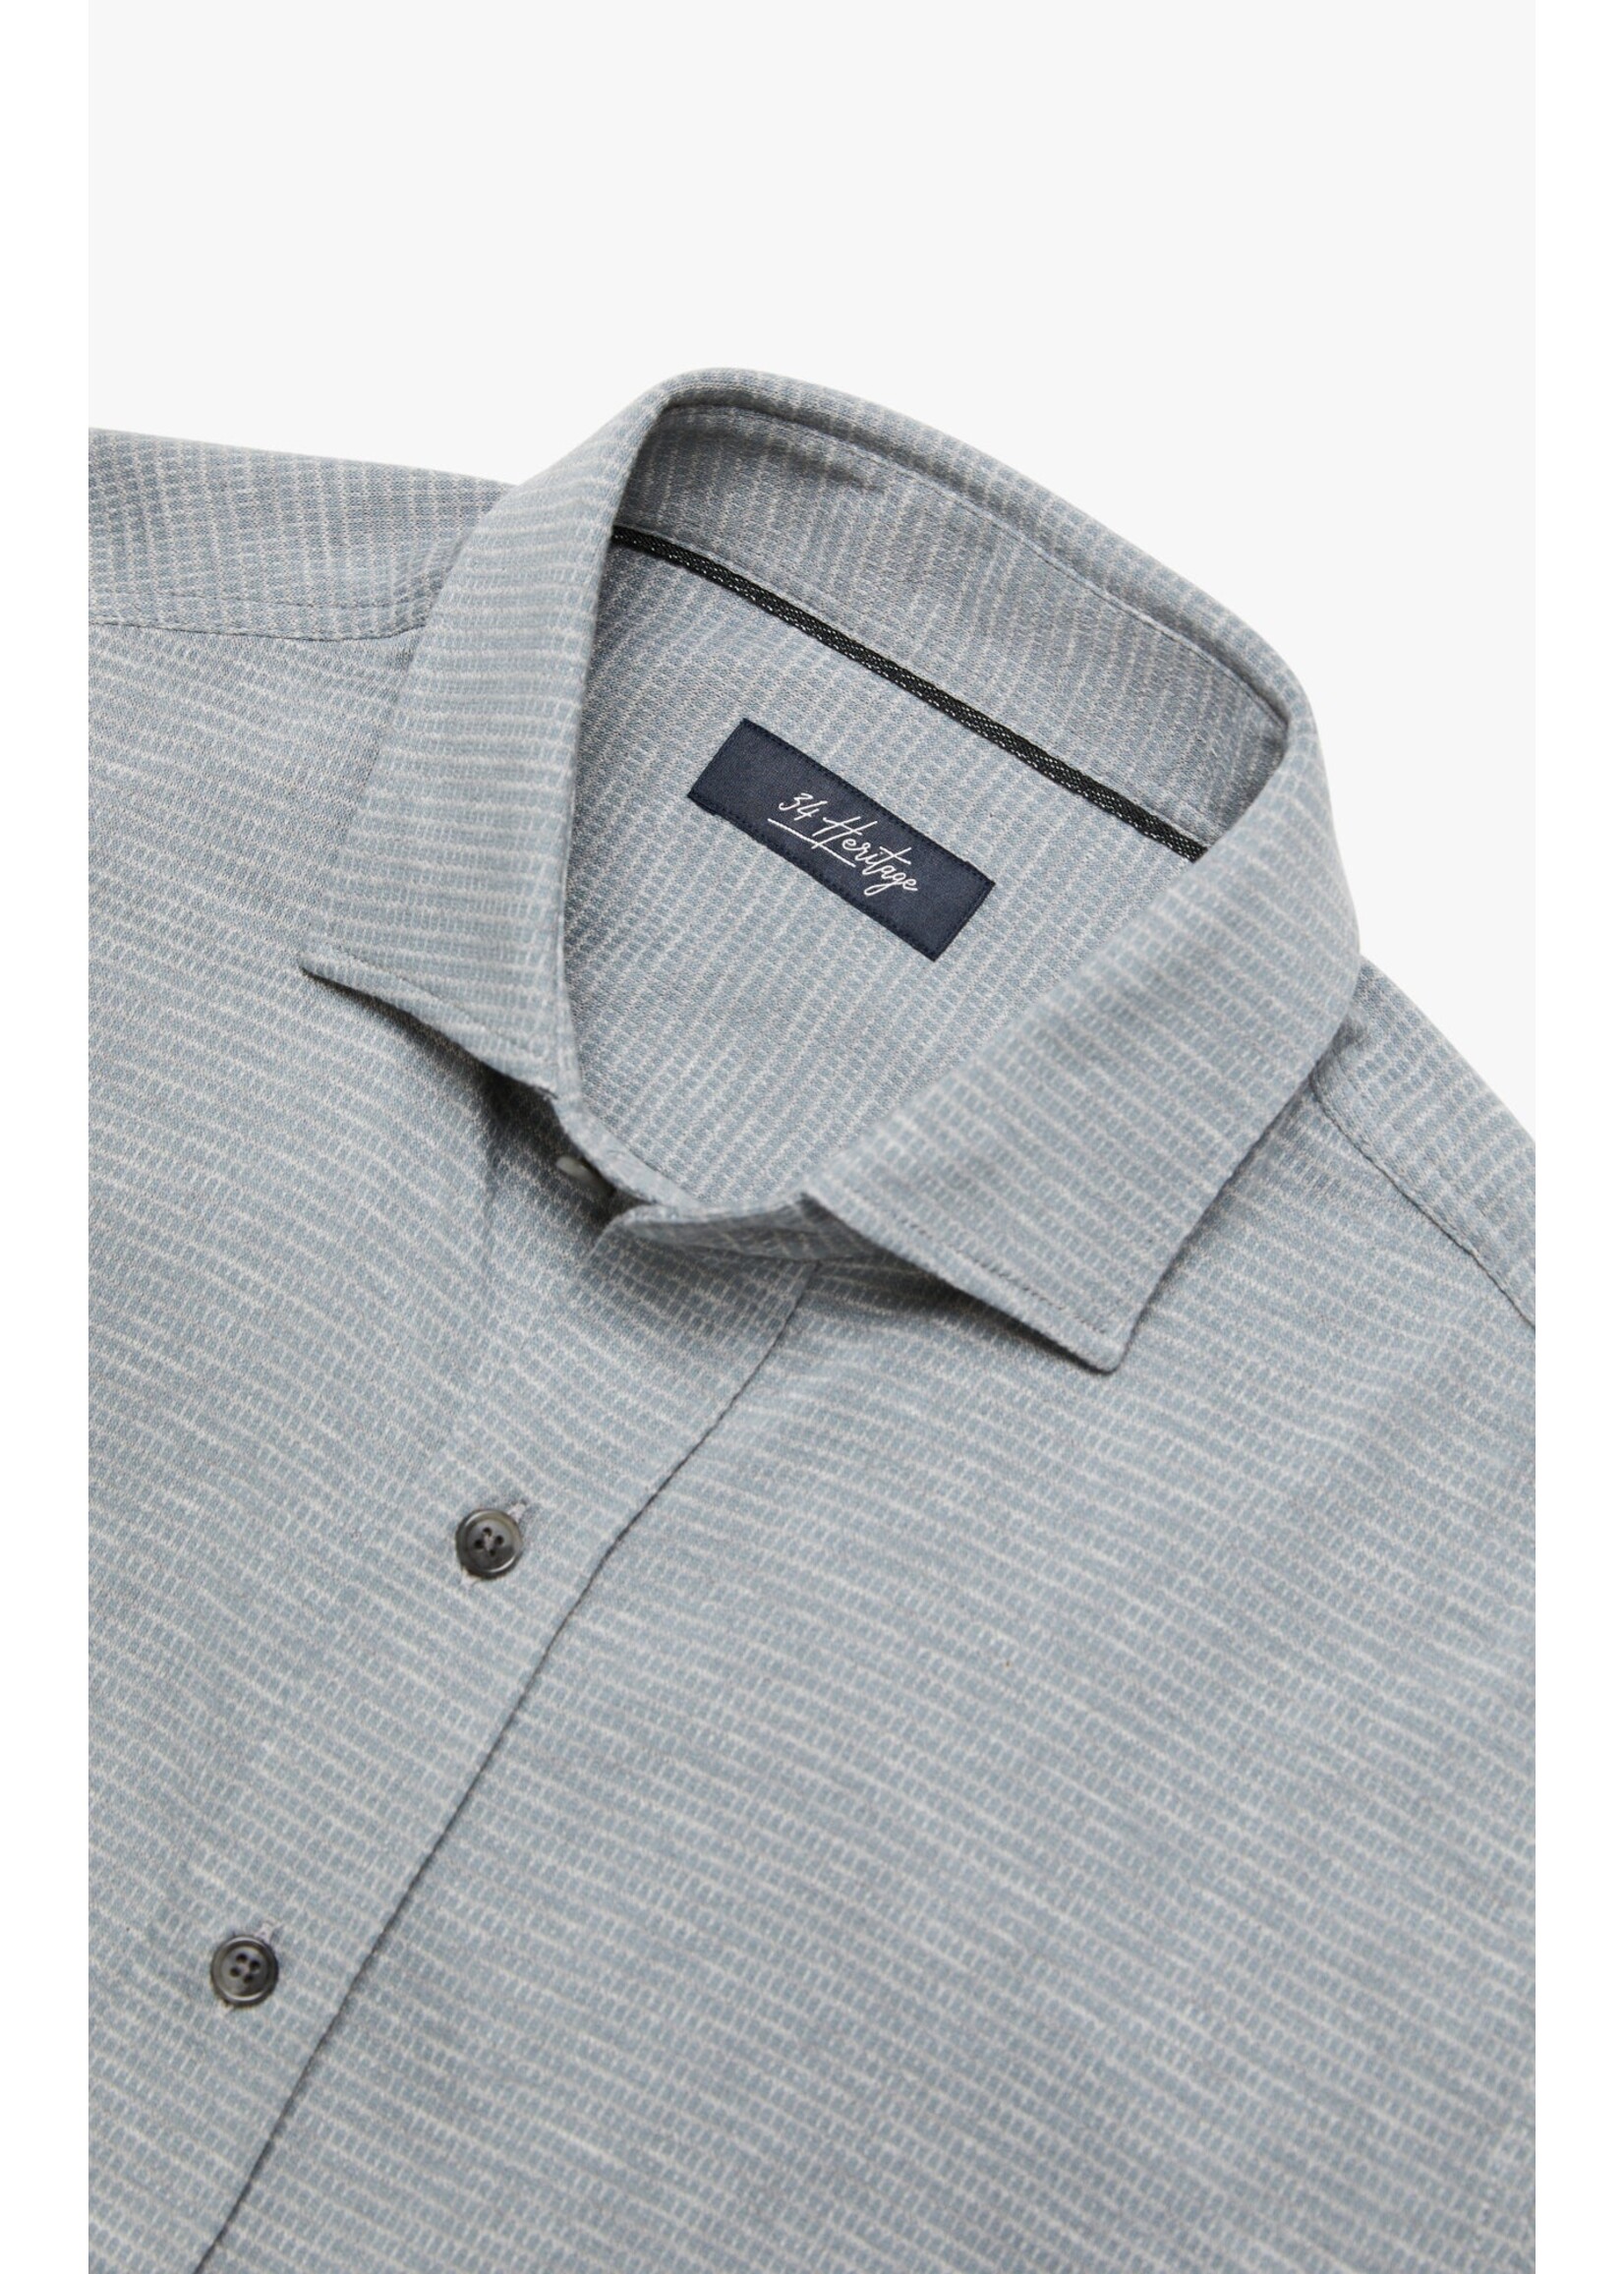 34 Heritage 34 Heritage Structured Shirt